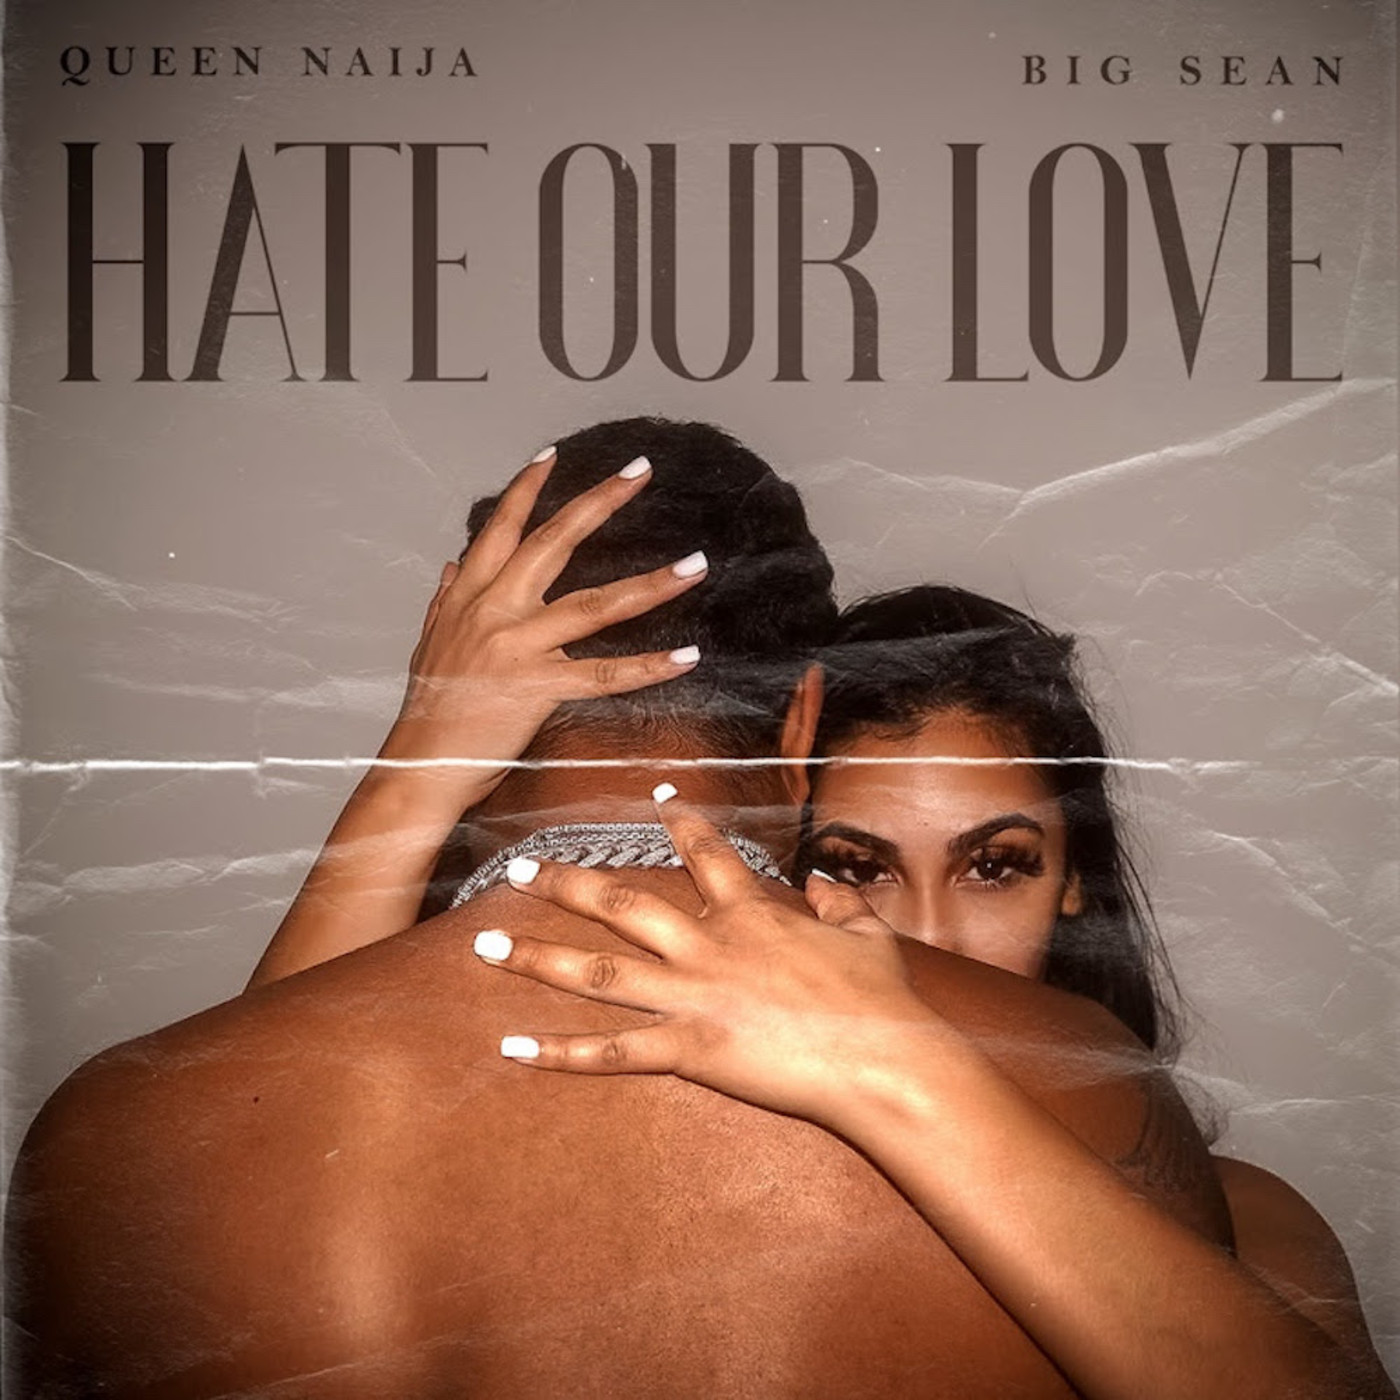 Queen Naija Connects With Big Sean on New Song “Hate Our Love” | Complex